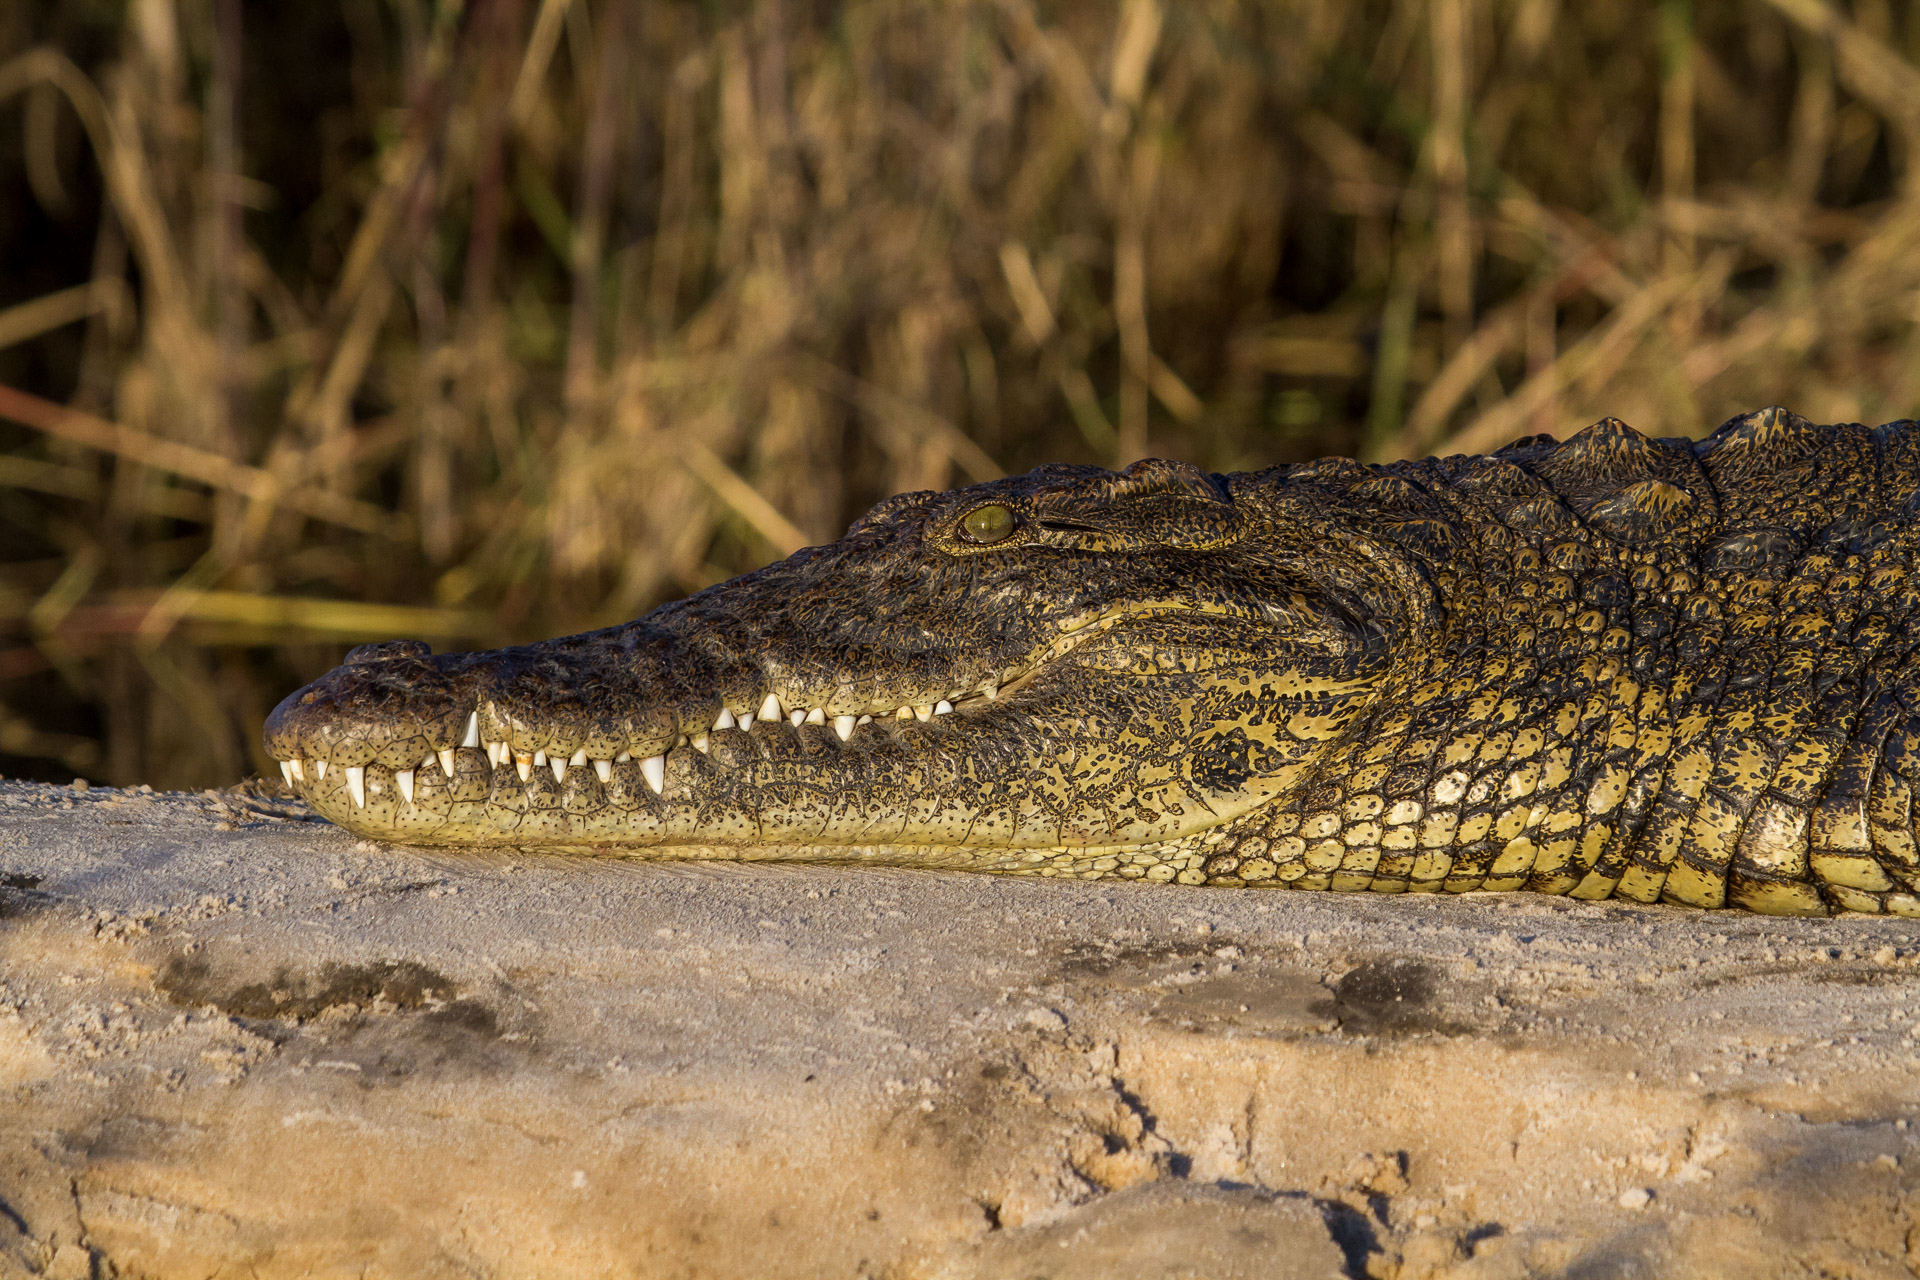 a close up of a crocodile laying on the ground